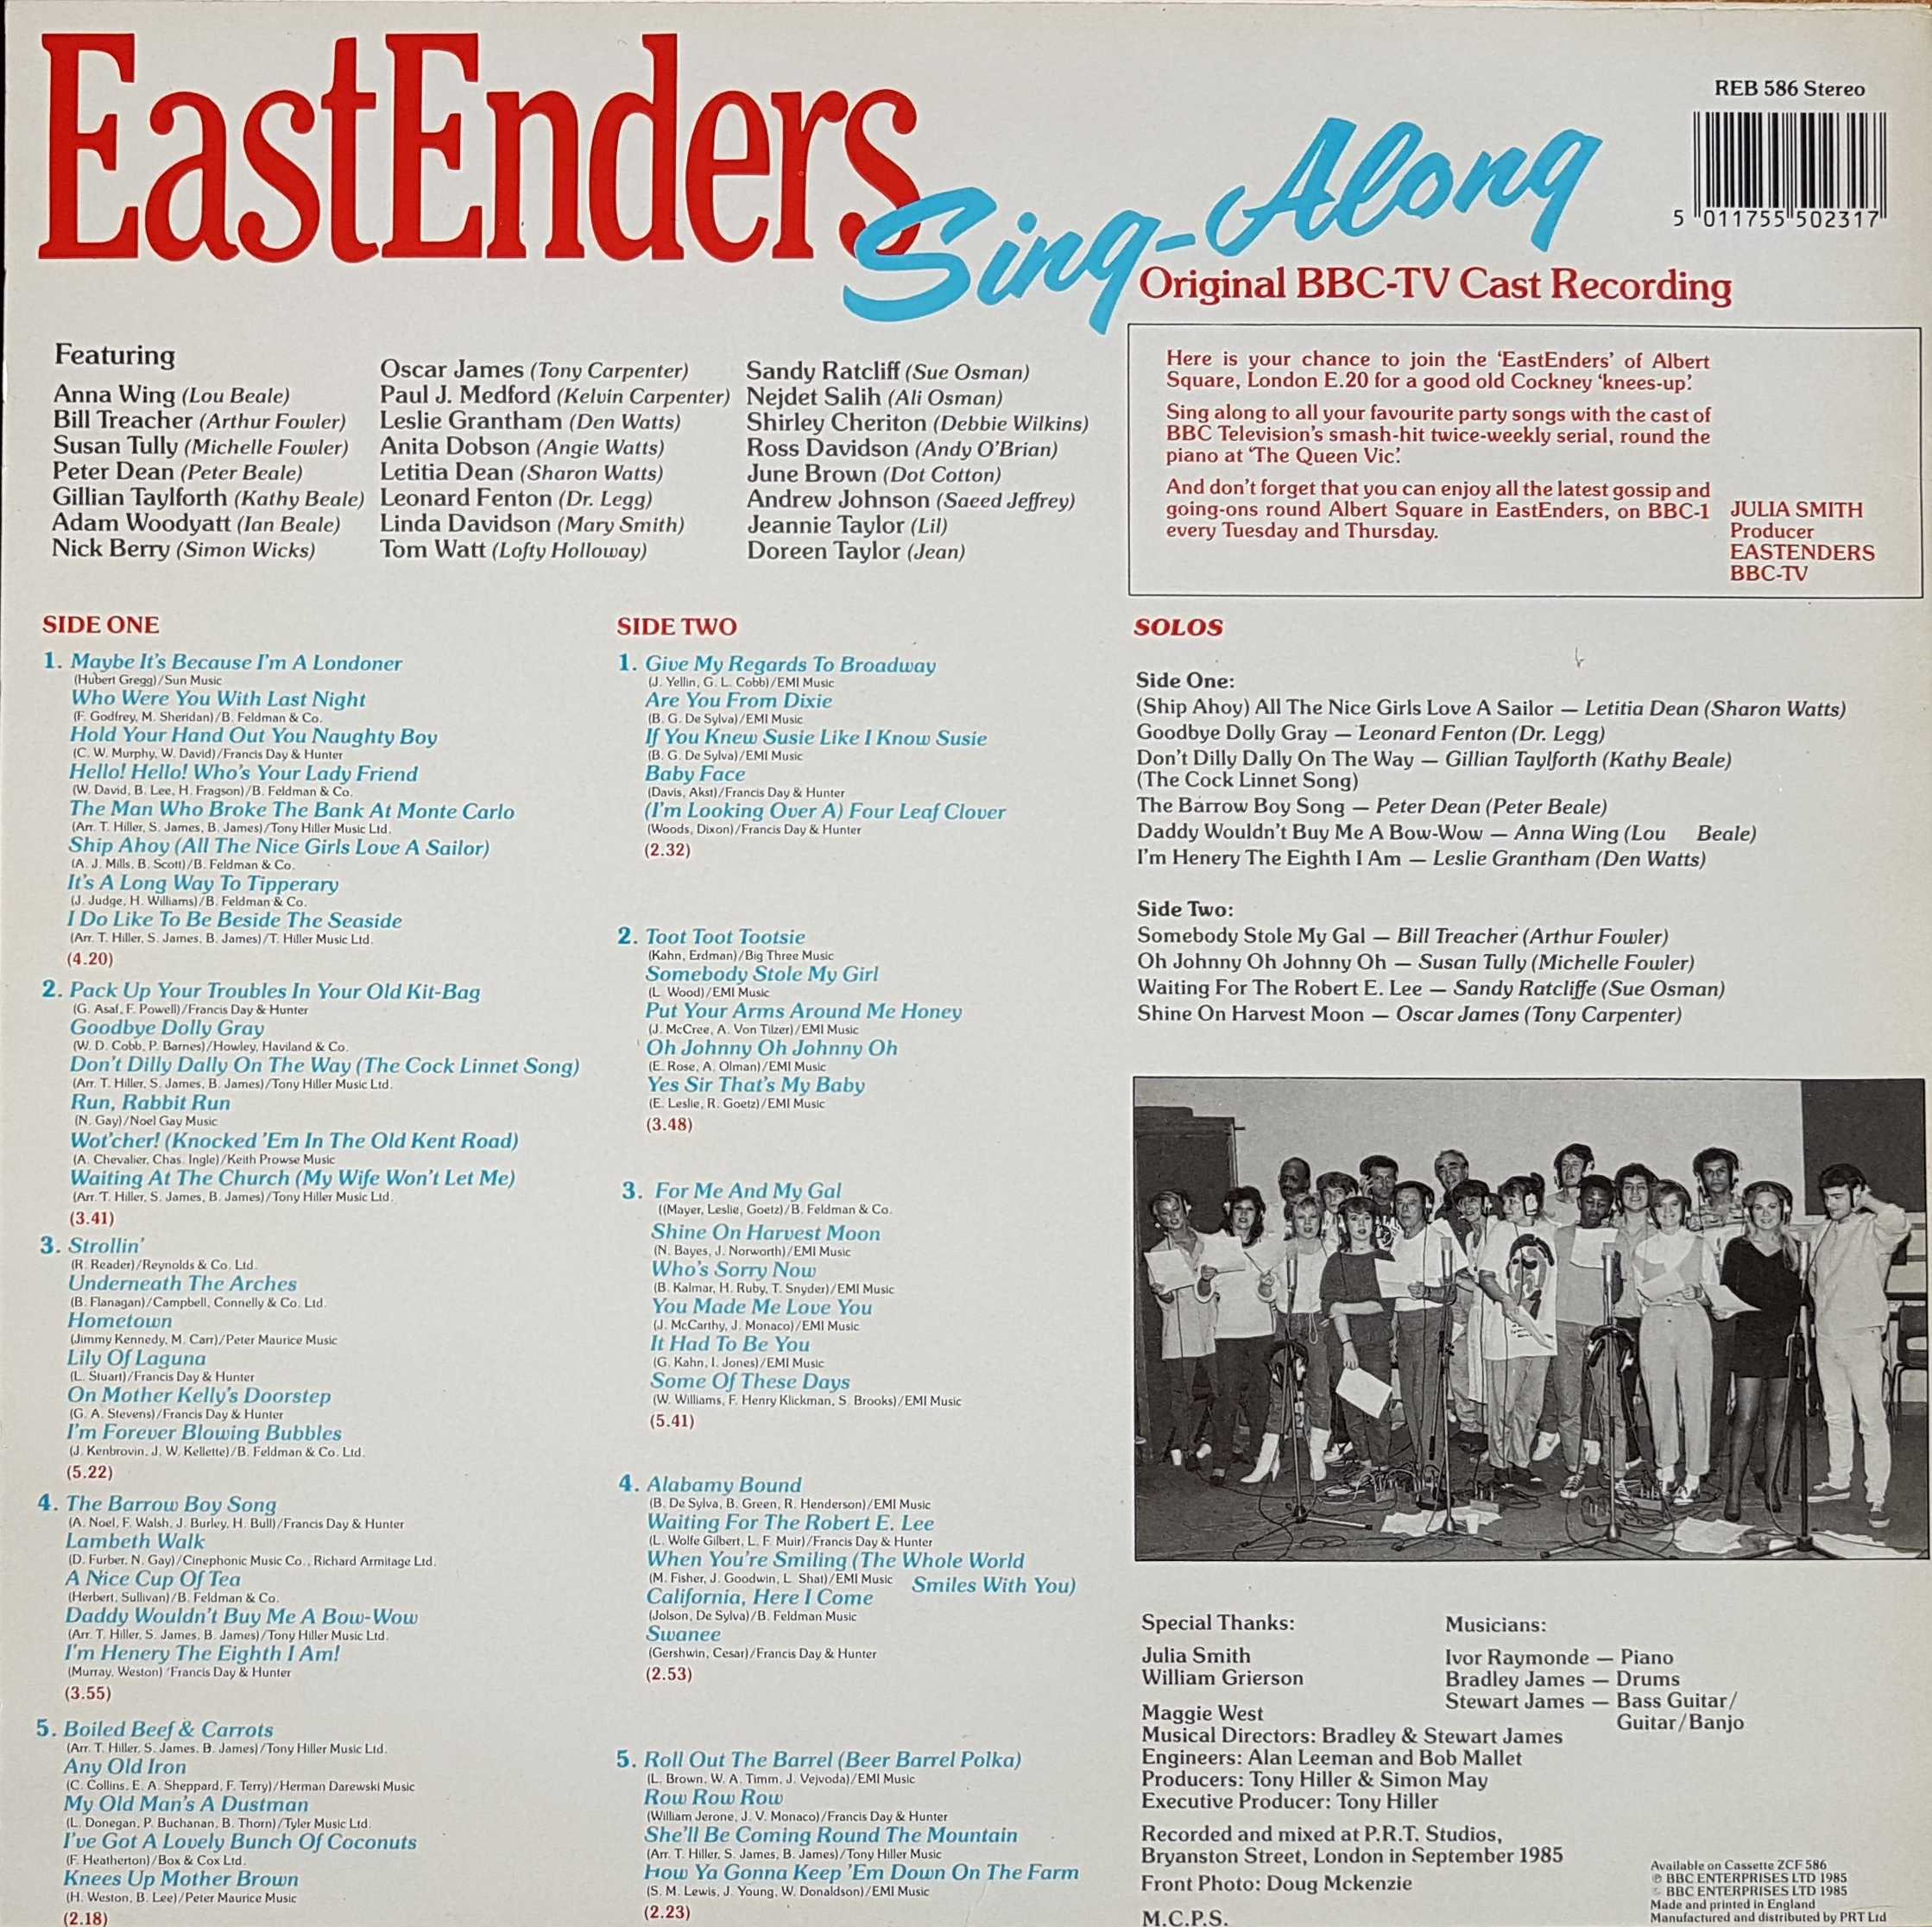 Picture of REB 586 EastEnders singalong by artist Various from the BBC records and Tapes library